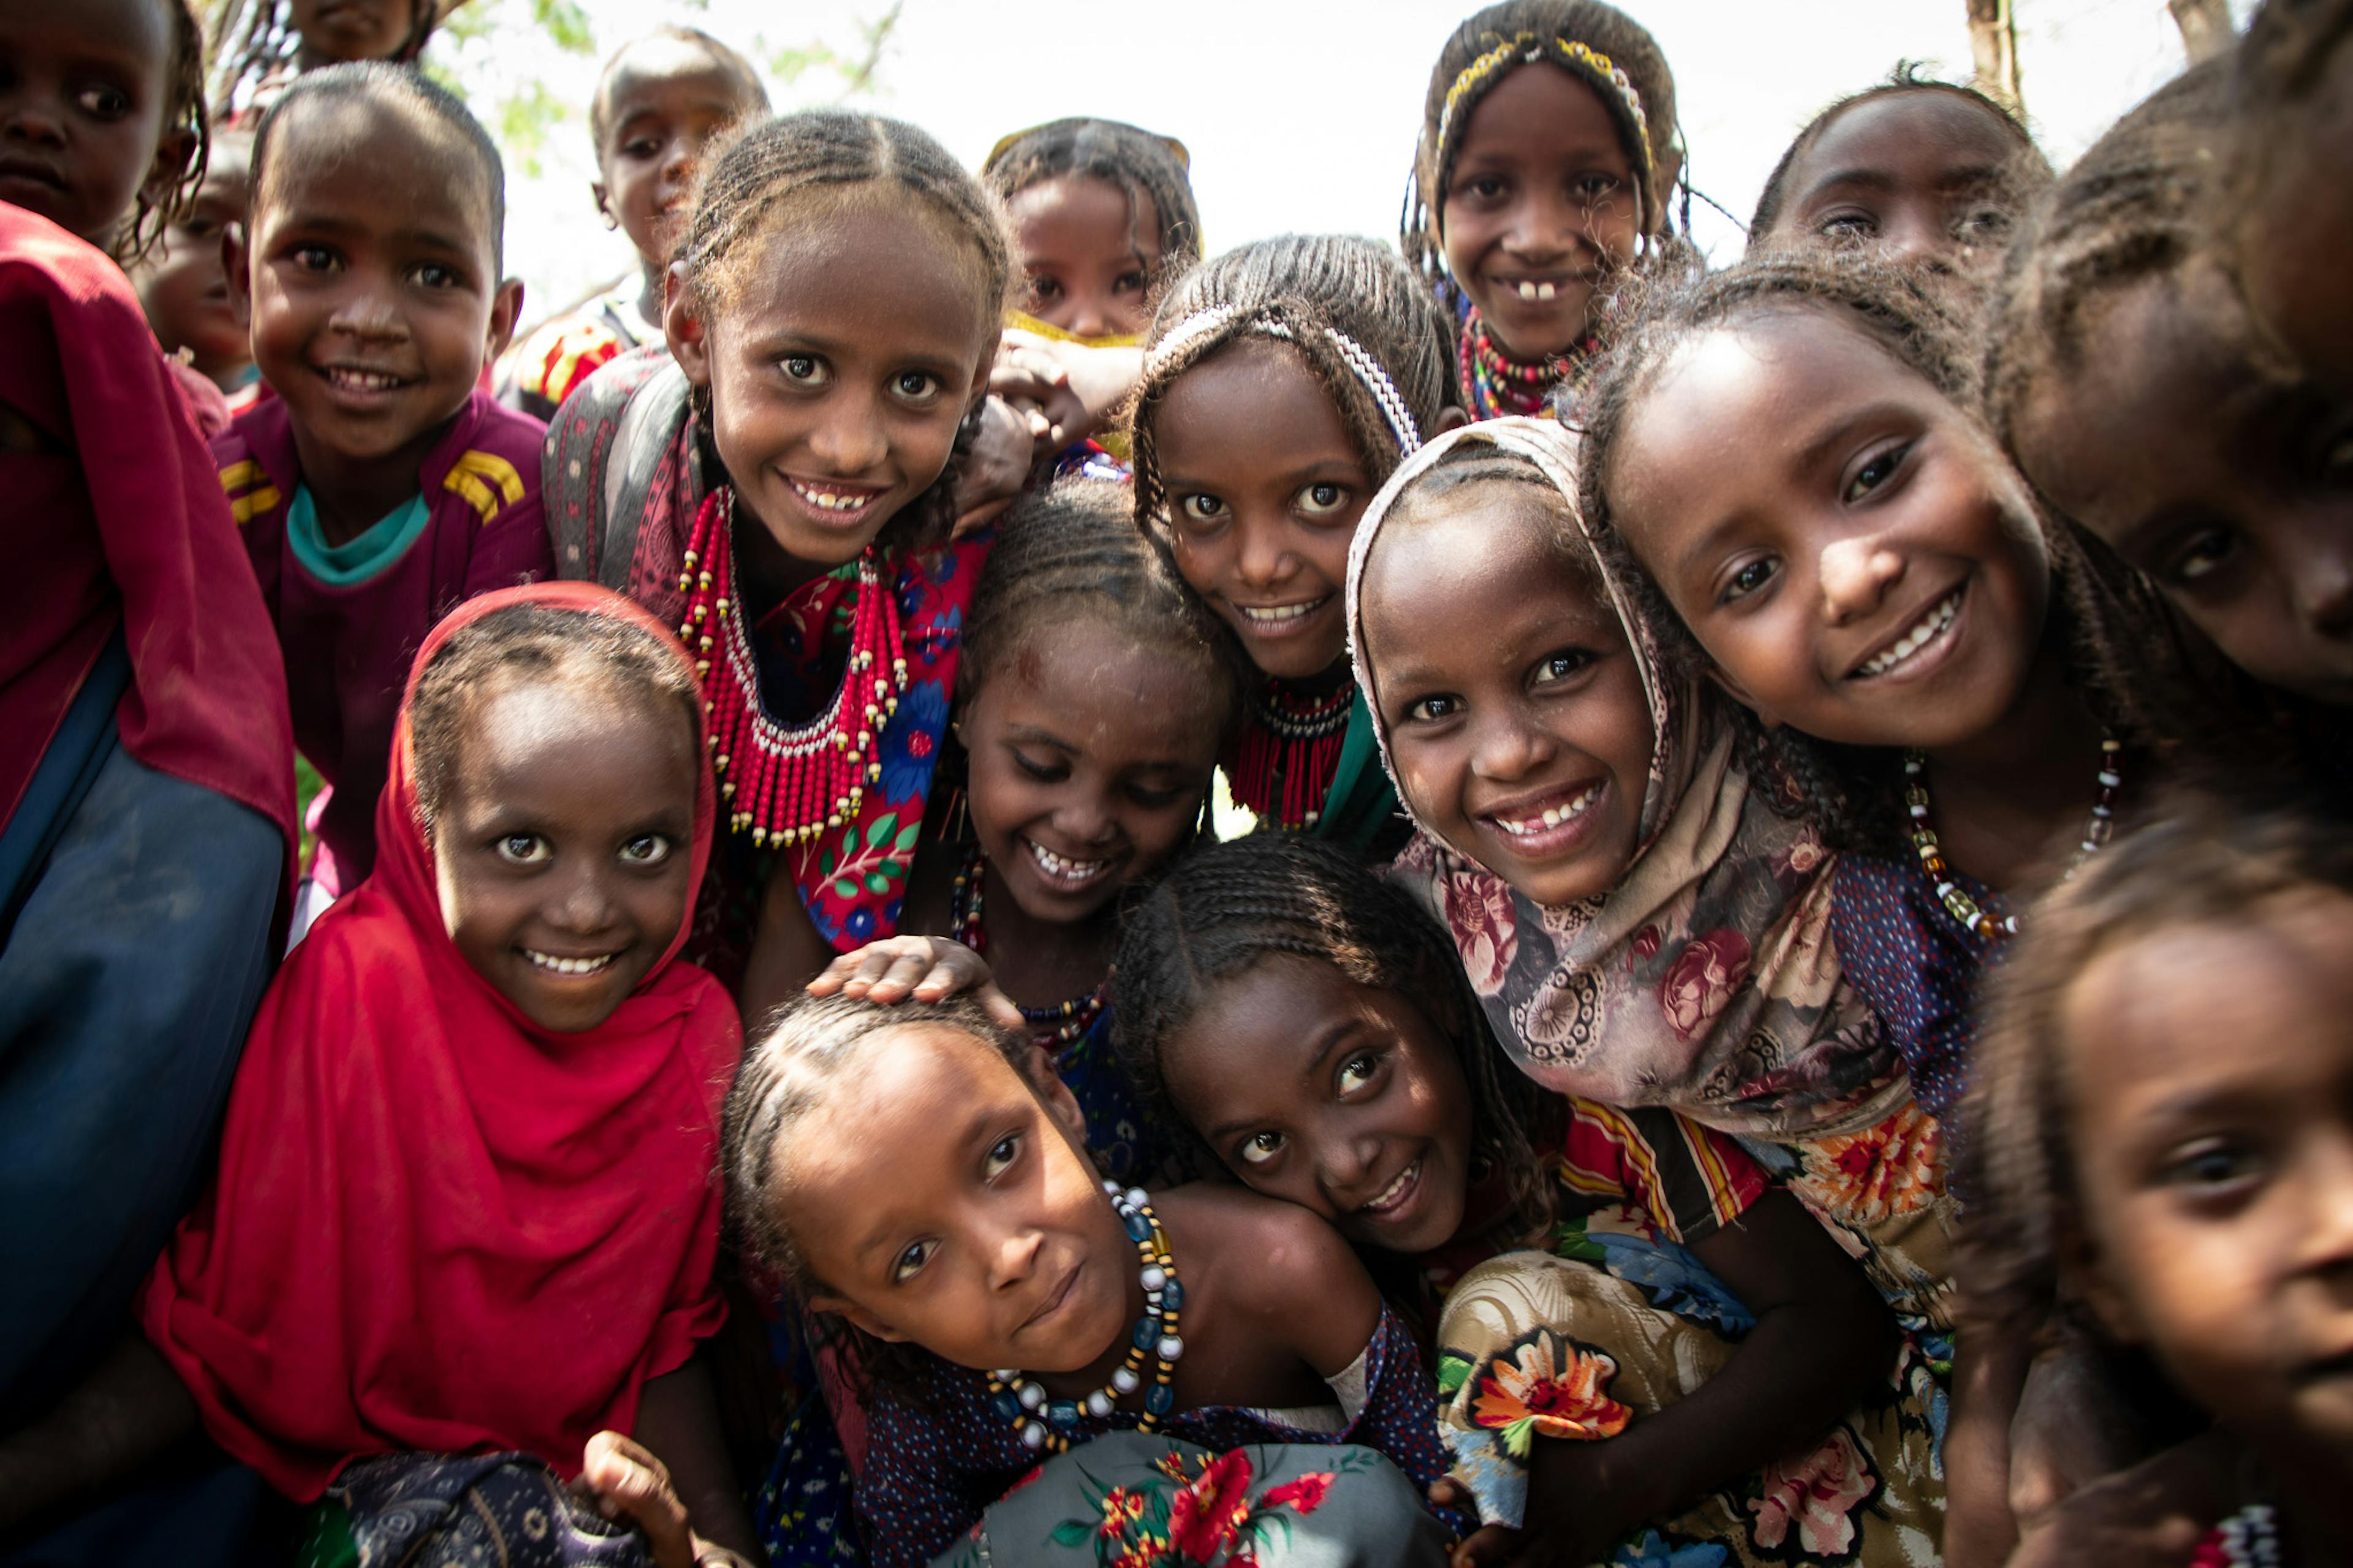 In the drought-stricken Afar region of north-eastern Ethiopia, water scarcity and loss of livelihoods are threatening the future of girls who are increasingly forced into child marriage.